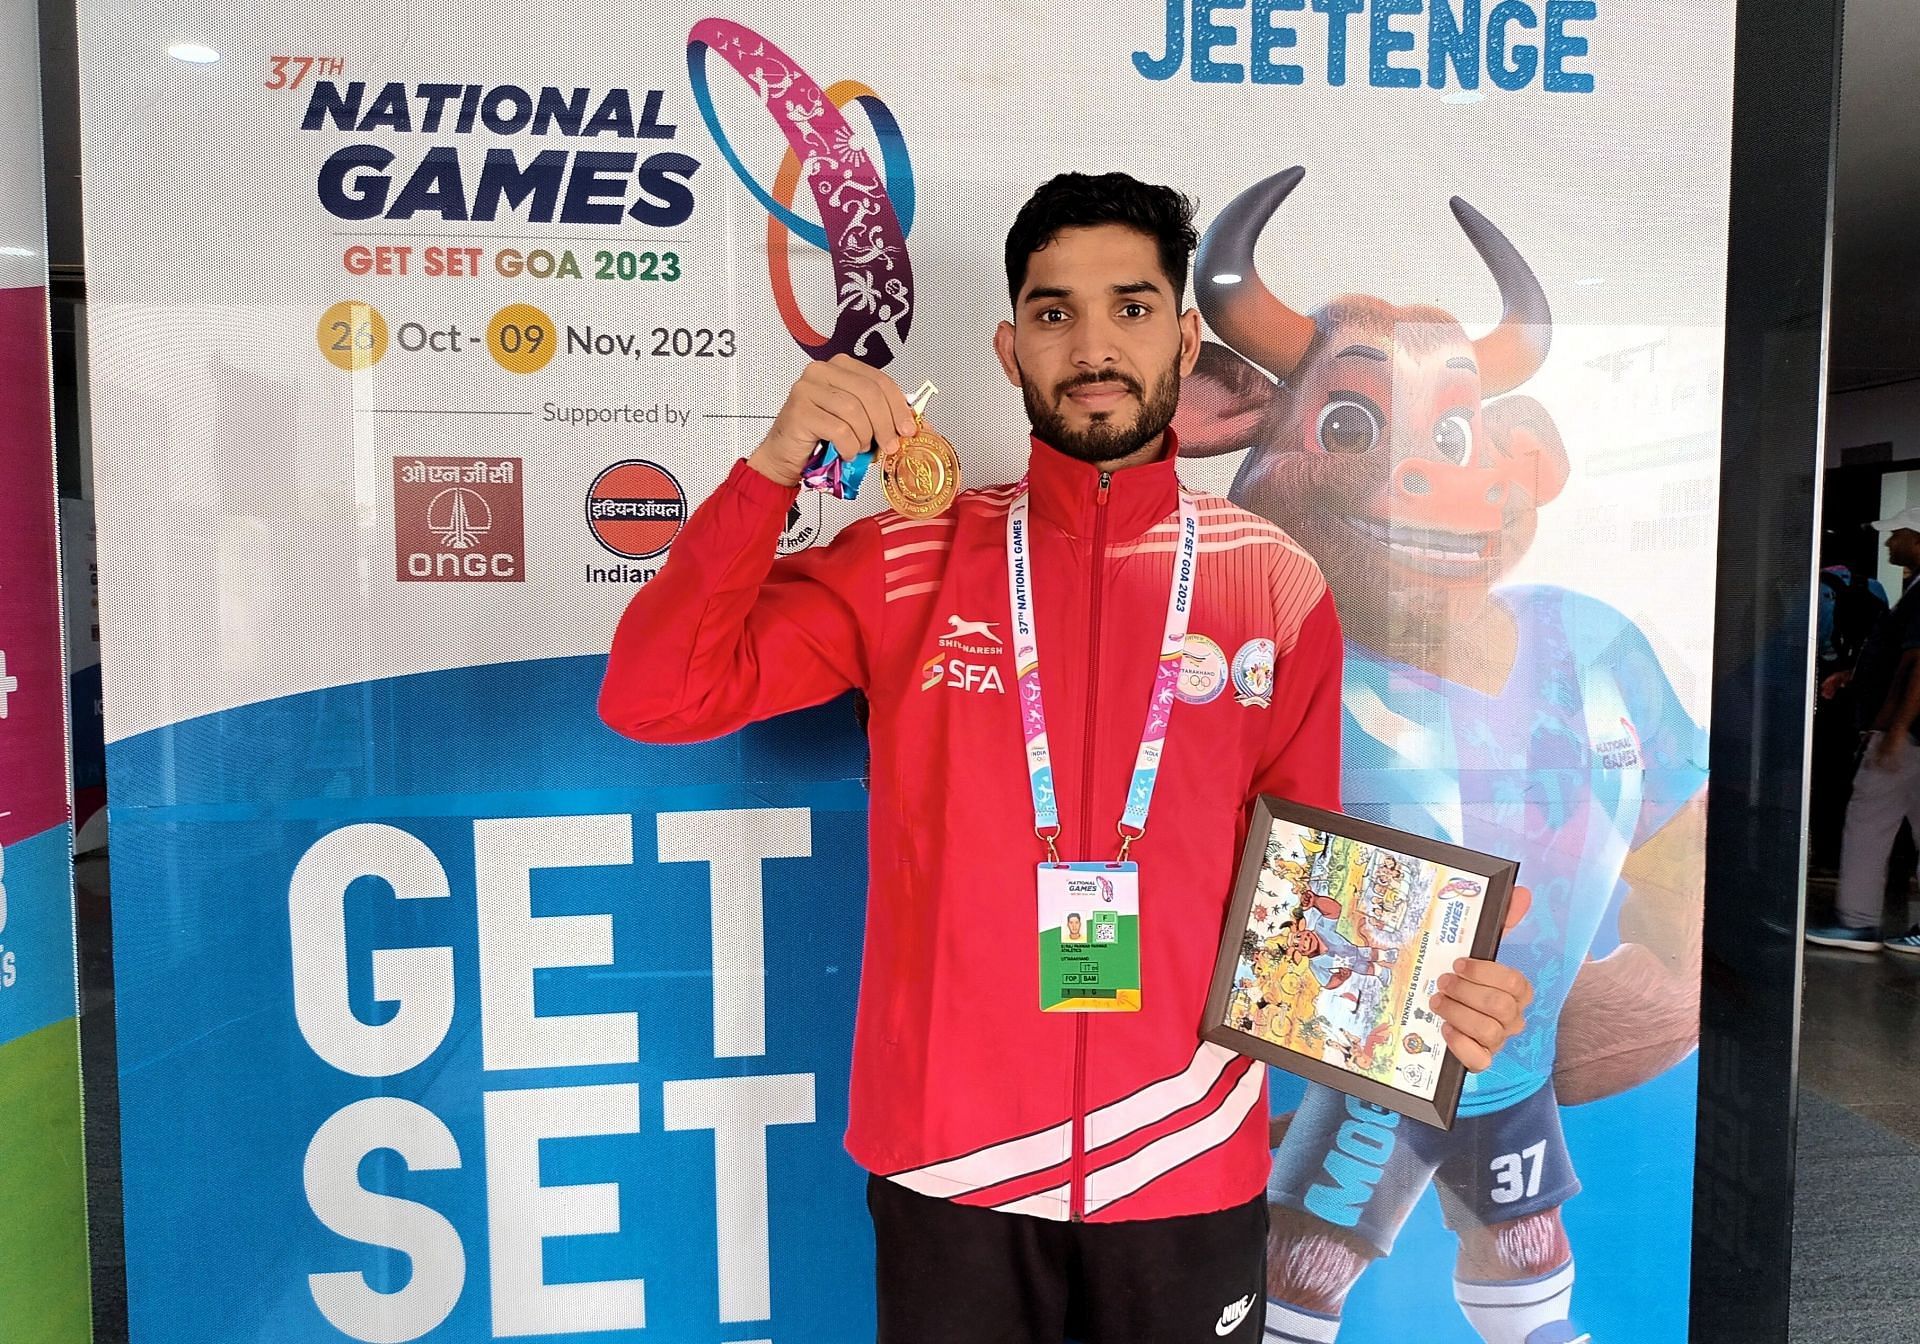 Uttarakhand&rsquo;s Suraj Panwar won gold medal in the men&rsquo;s 20km race walk at the 37th National Games in Goa on Monday. Photo credit: Navneet Singh 